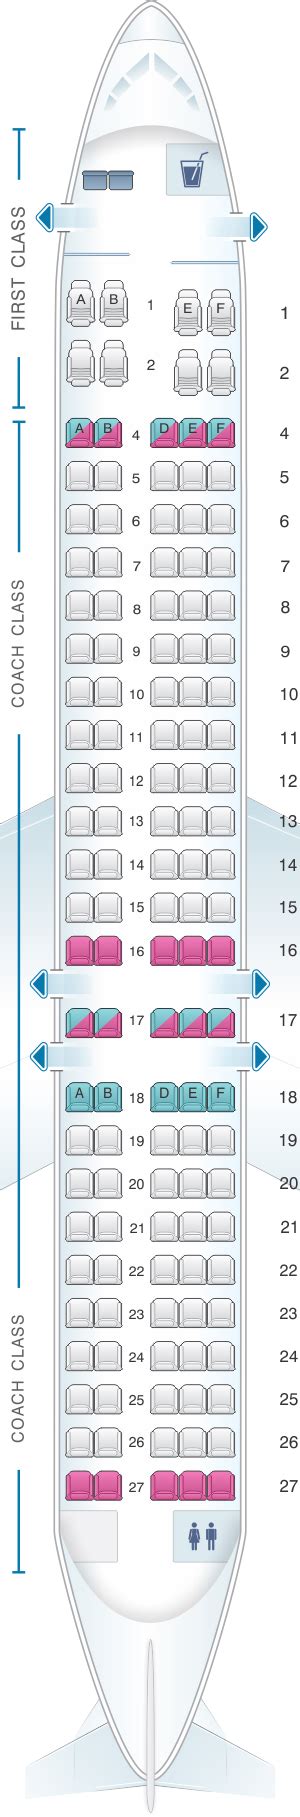 Hawaiian Airlines Boeing 717 Seating Chart